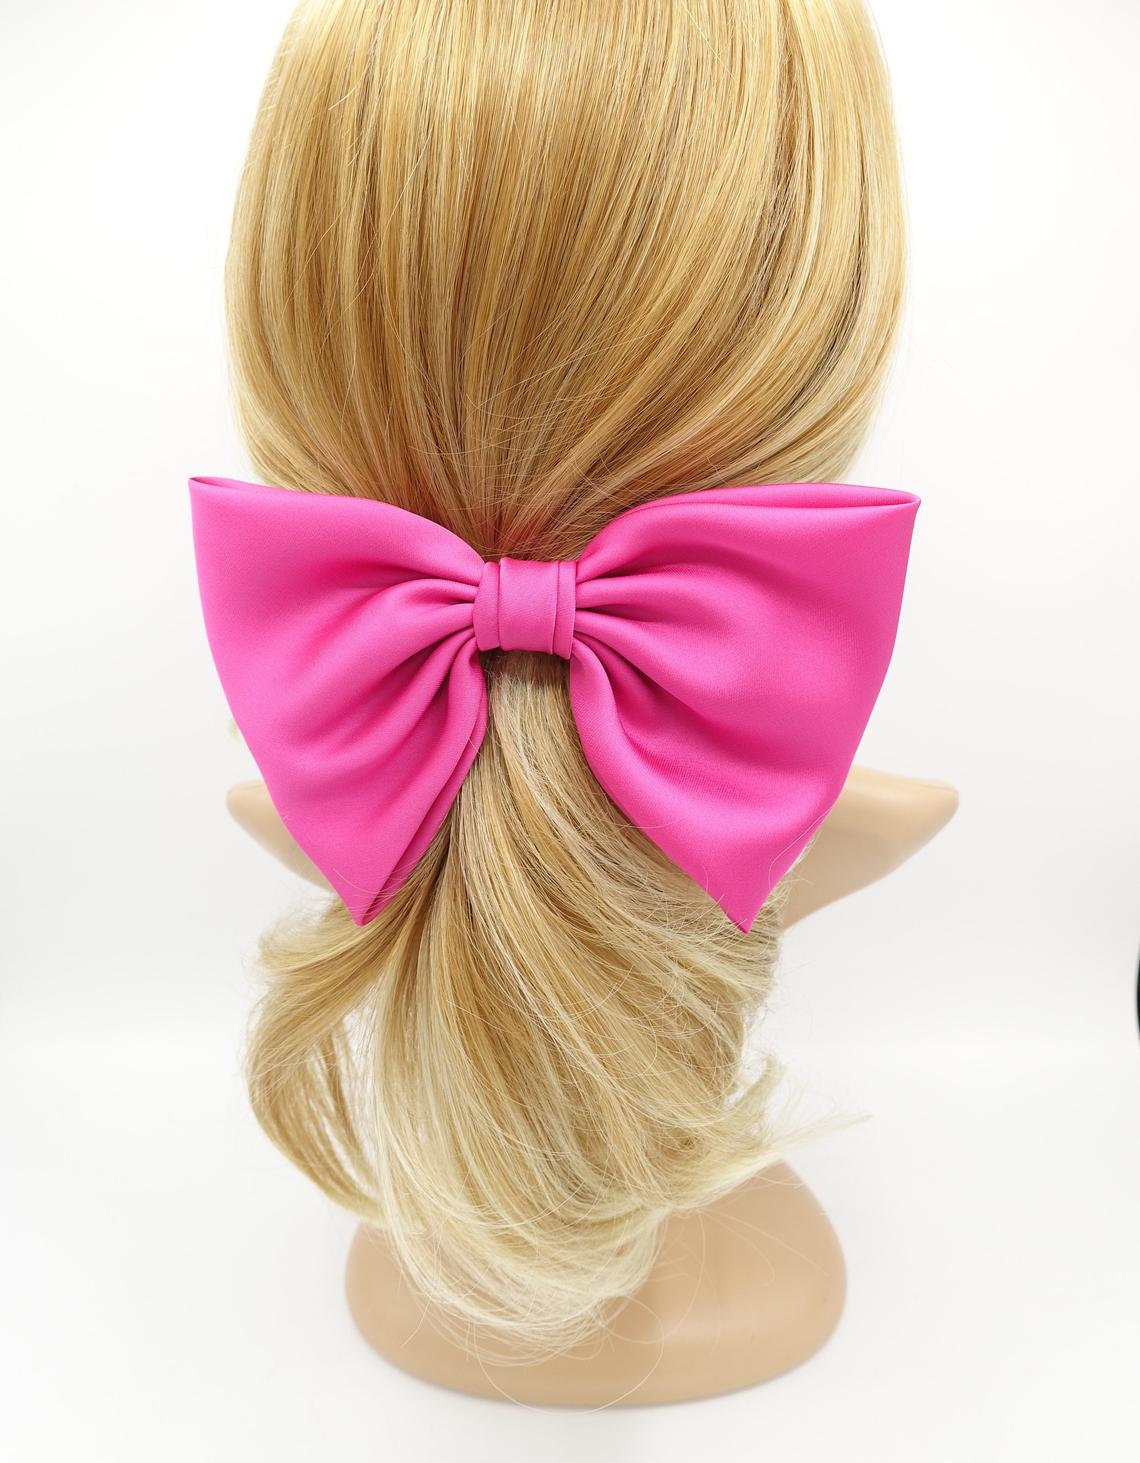 Hair bows: Add flair to any hairstyle with this trendy accessory